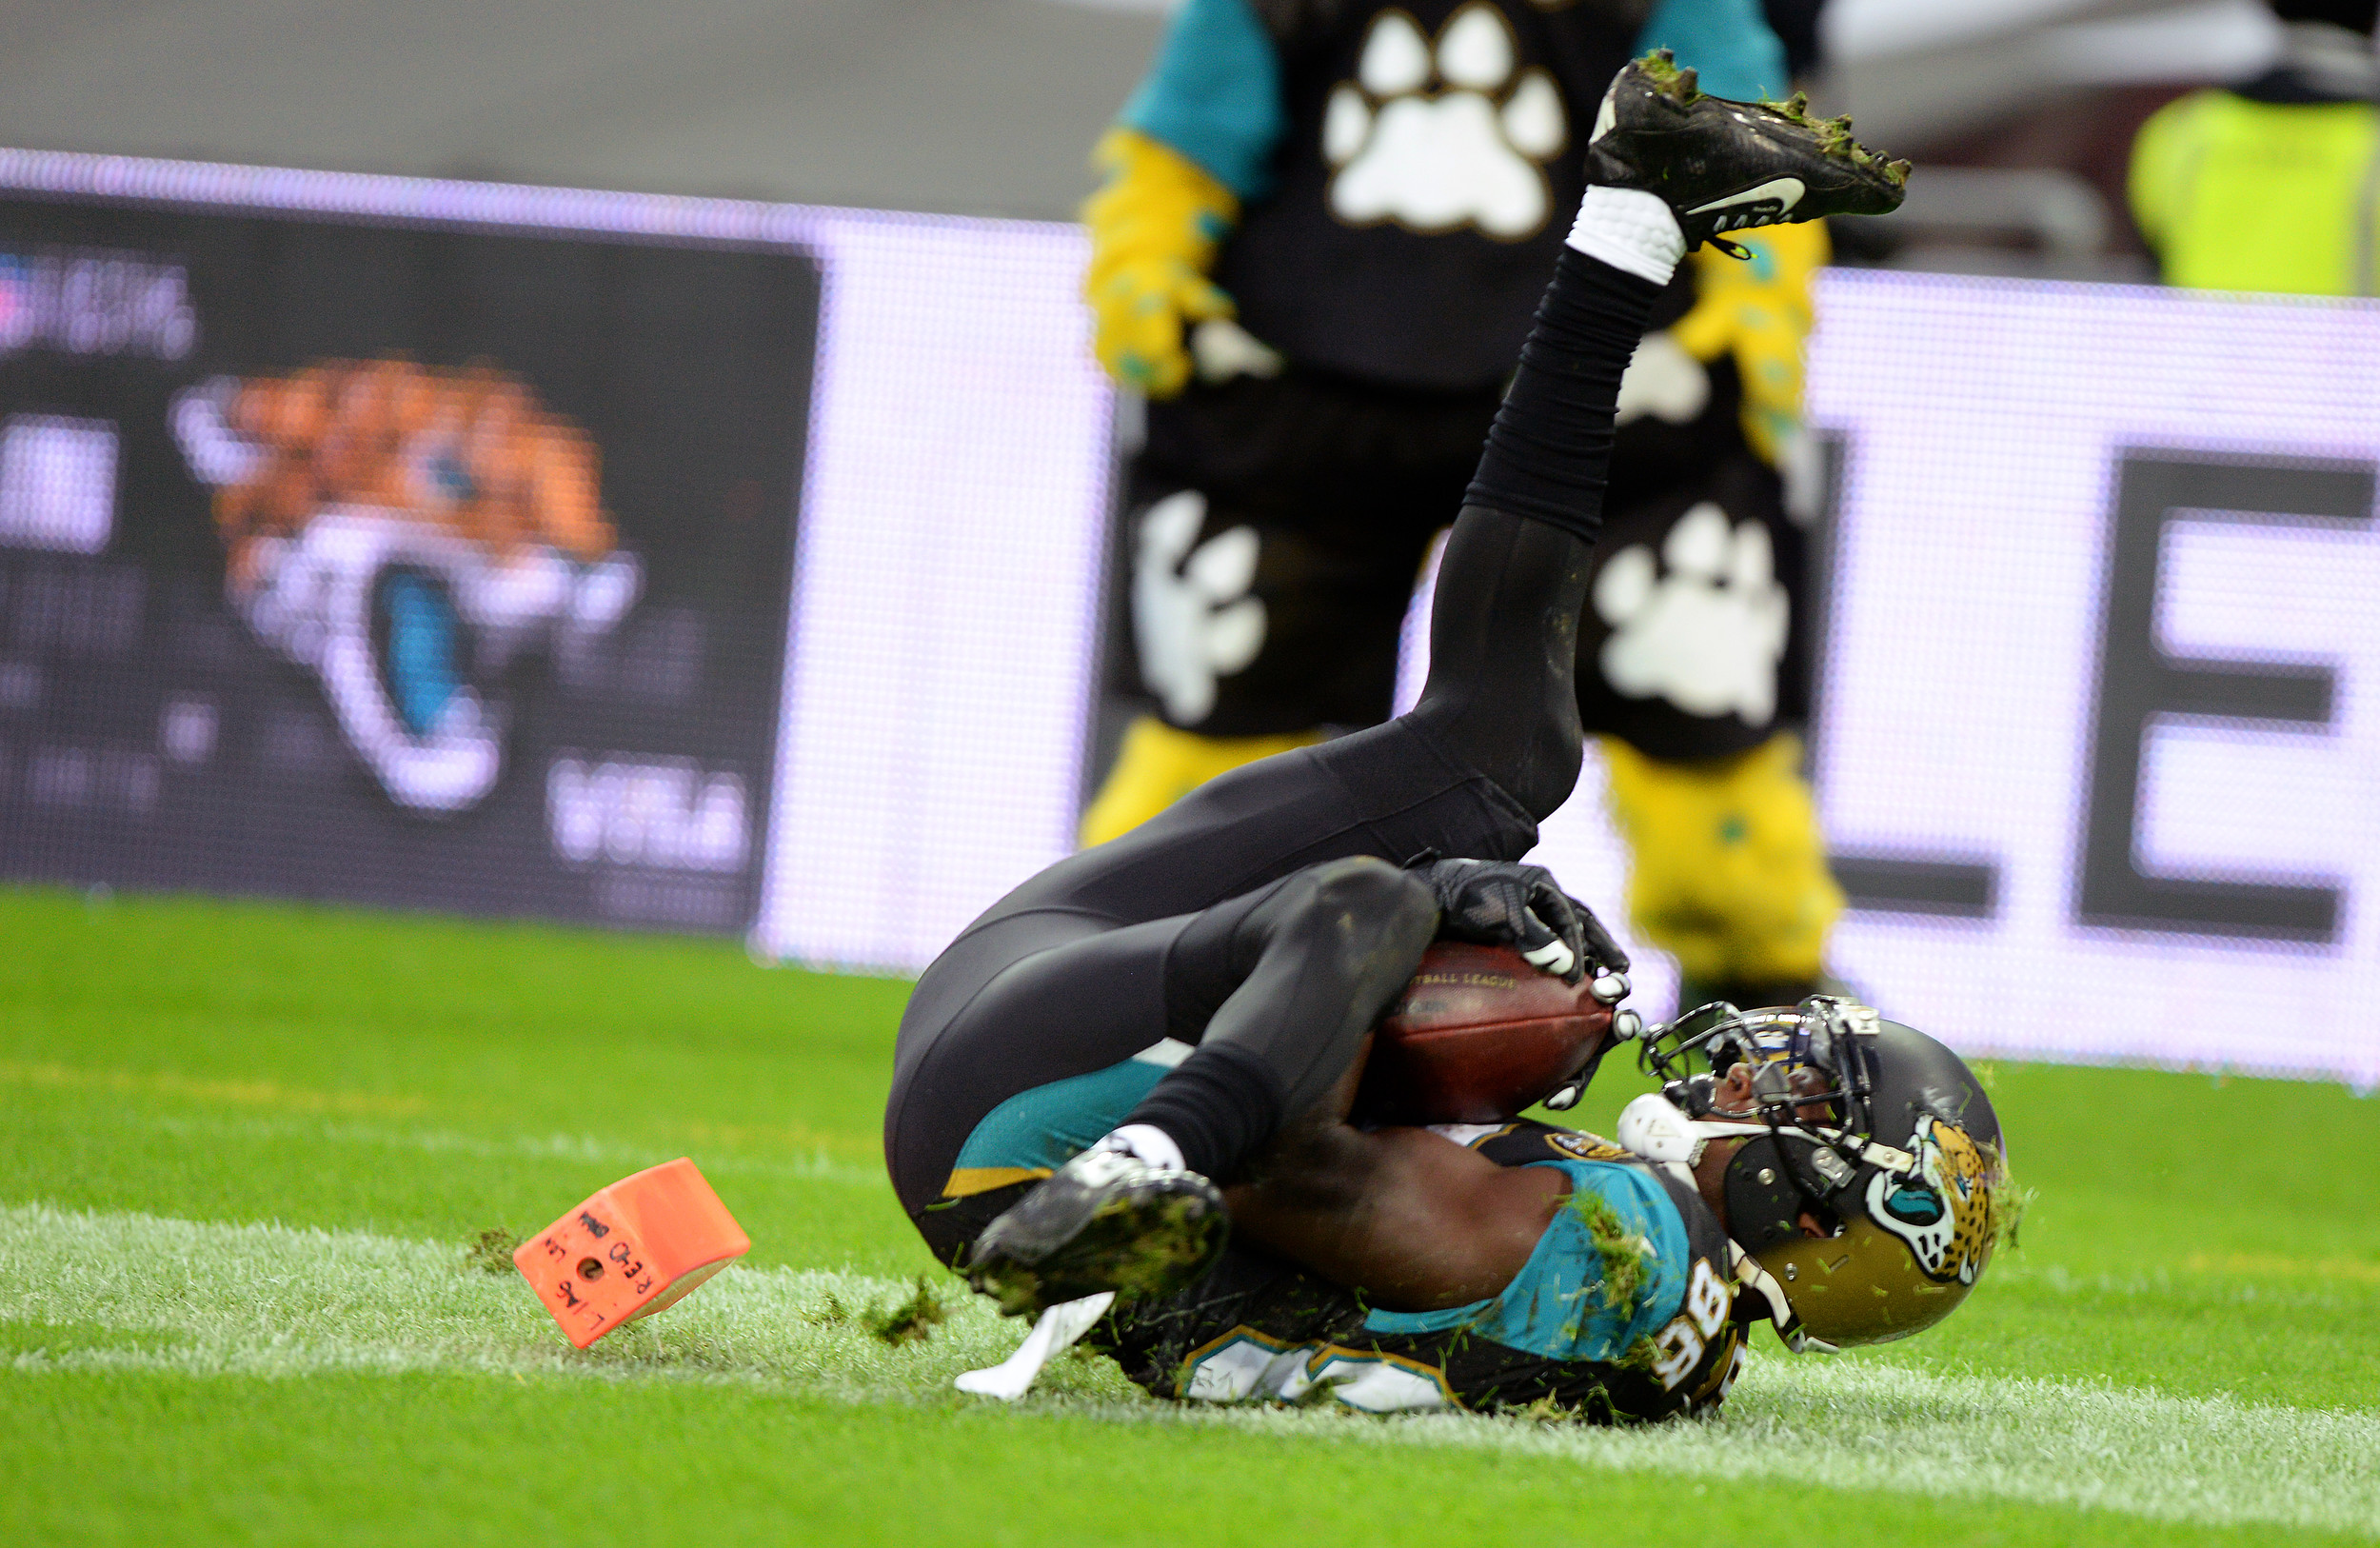 Jacksonville Jaguars receiver Allen Hurns (88) makes the diving, game-winning 31 yard touchdown reception with 2:16 to play in the victory over the Buffalo Bills, Sunday, Oct. 25, 2015, in London, England.